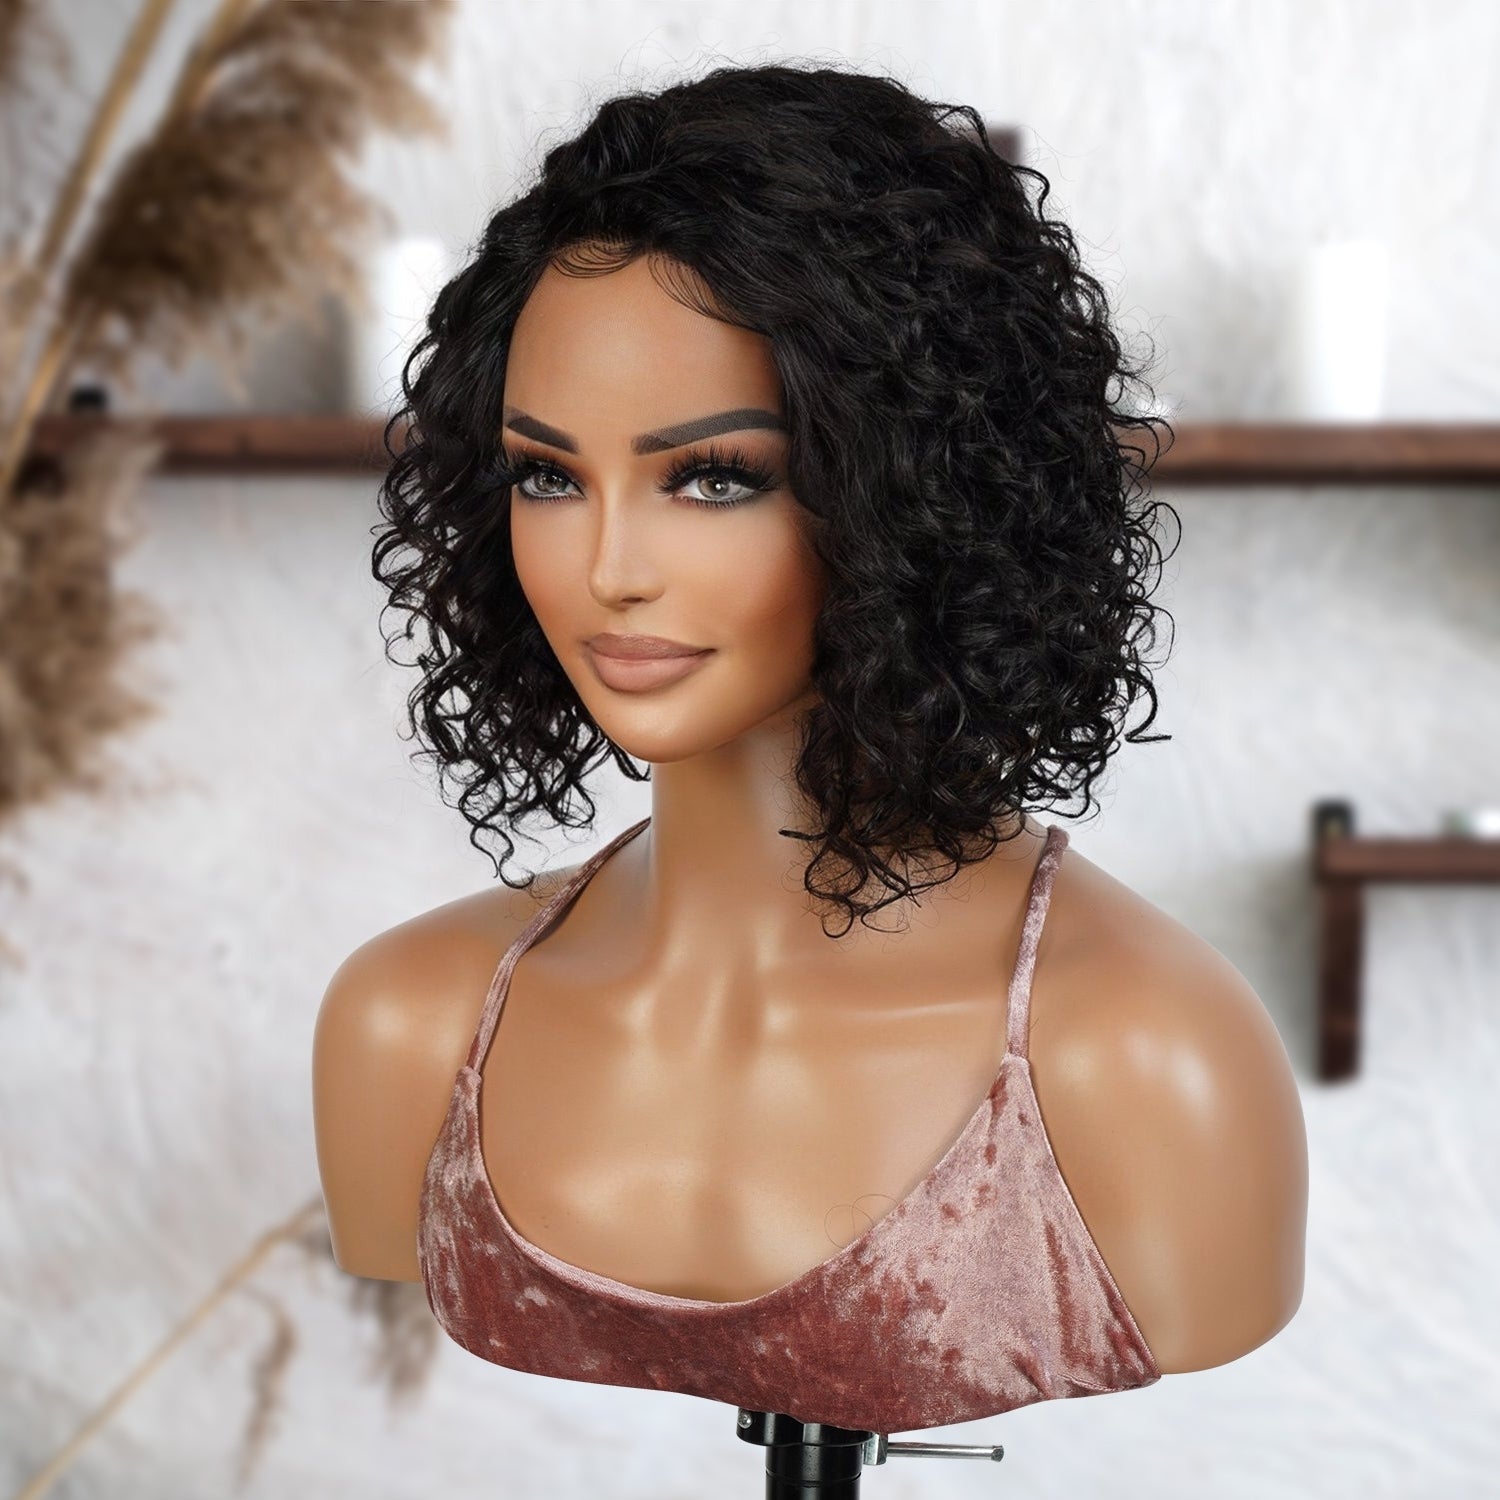 Shop affordable human hair wig. Center part short human hair bob lace front wigs made with Unprocessed Virgin Human hair, It has natural hairline which can be customized, Fits All Face Shapes. Glueless Minimalist Lace Bob Wig, Short curly bob is perfect for everyday use or any other special occasion, Ready-to-wear, Durable HD Lace that blend in perfectly